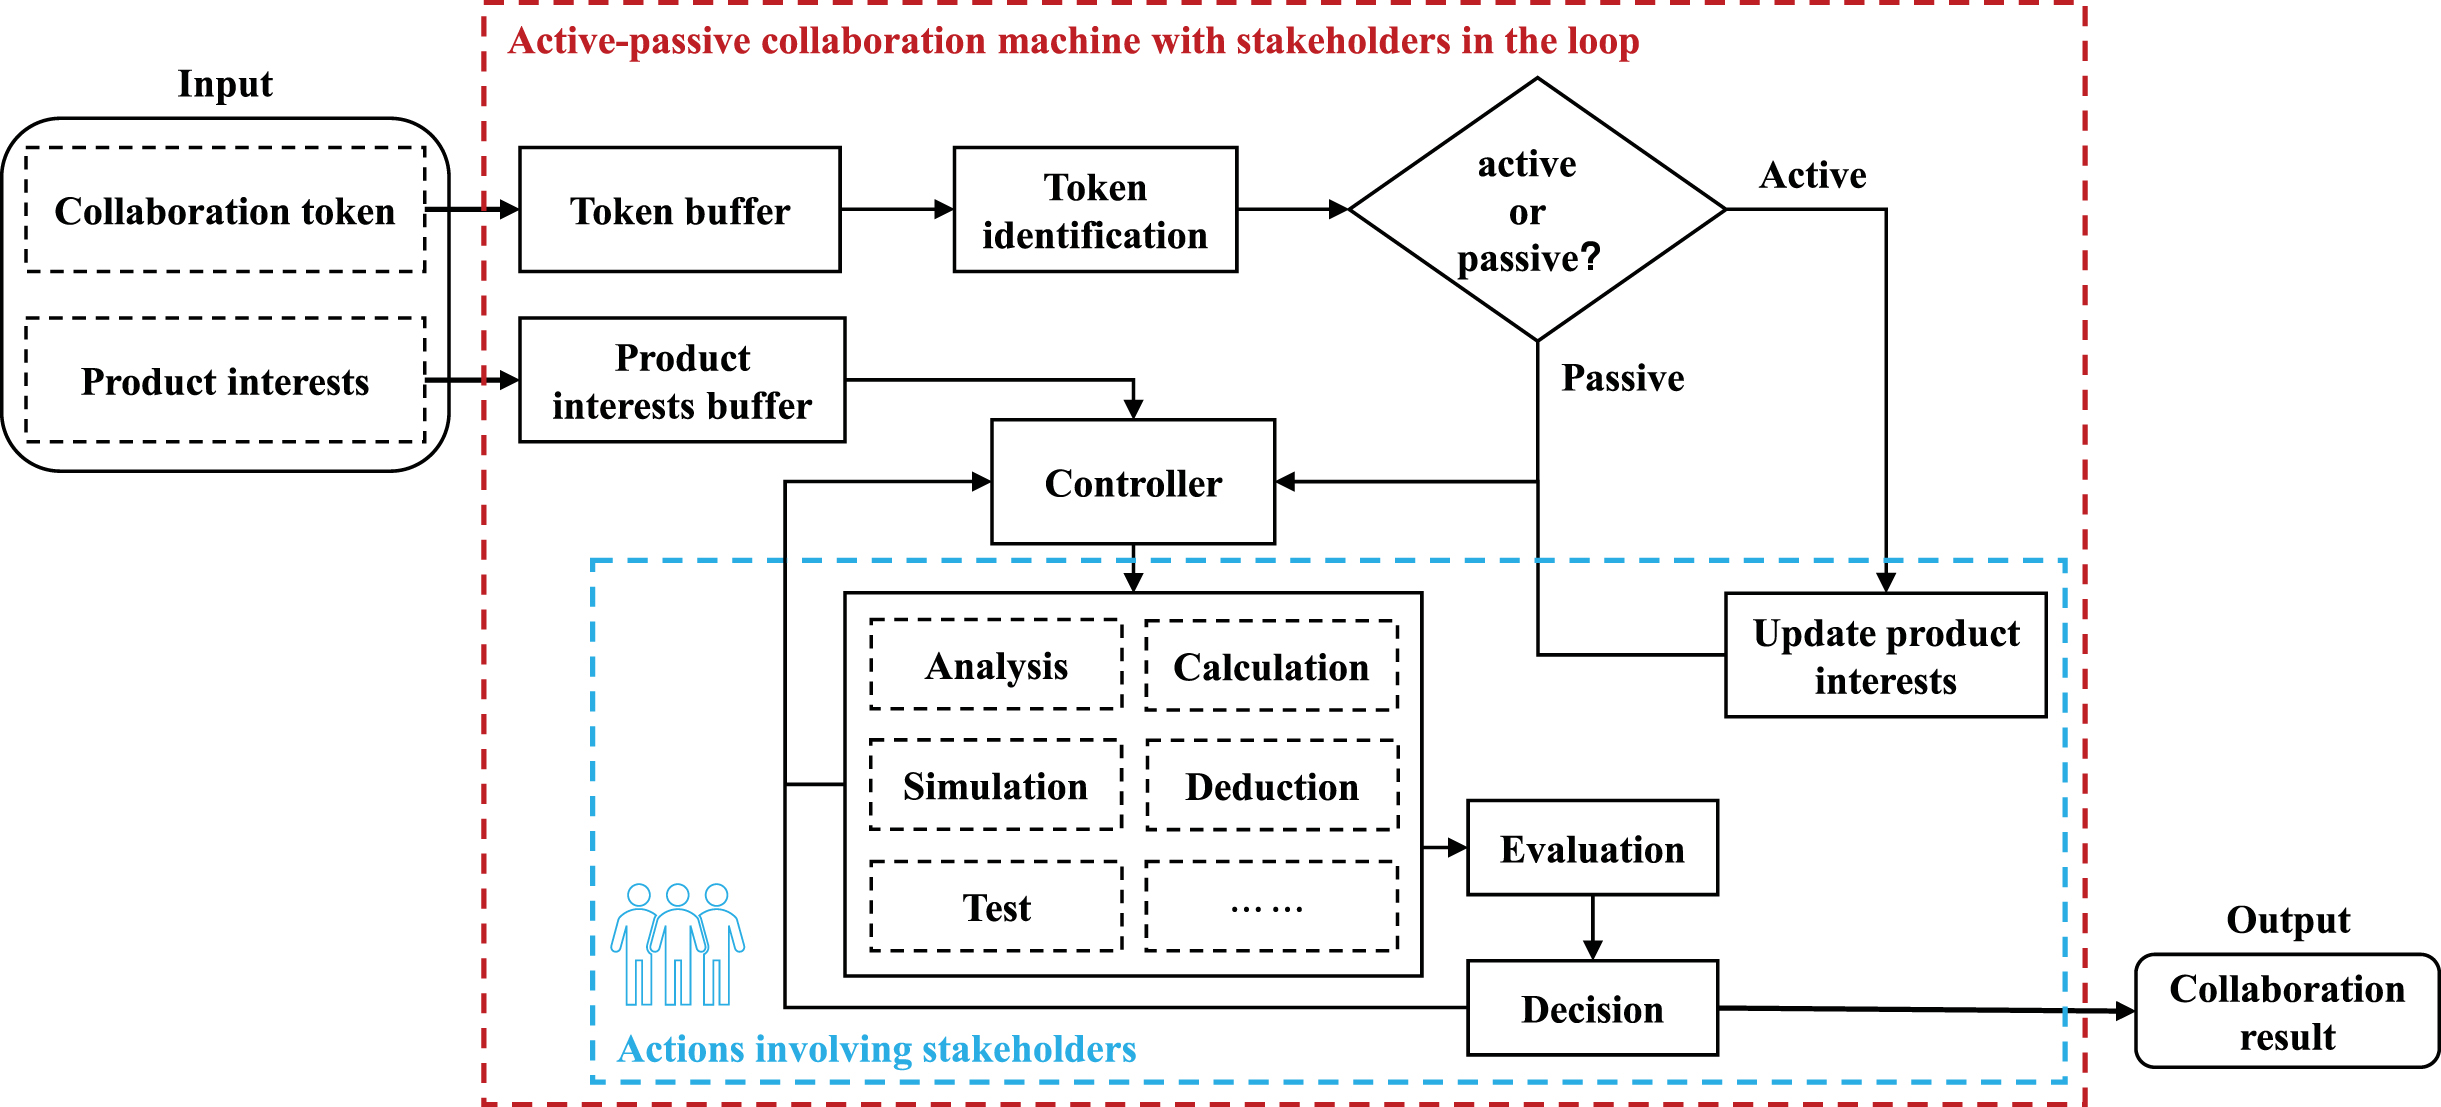 Active-passive collaboration machine with stakeholders in the loop.